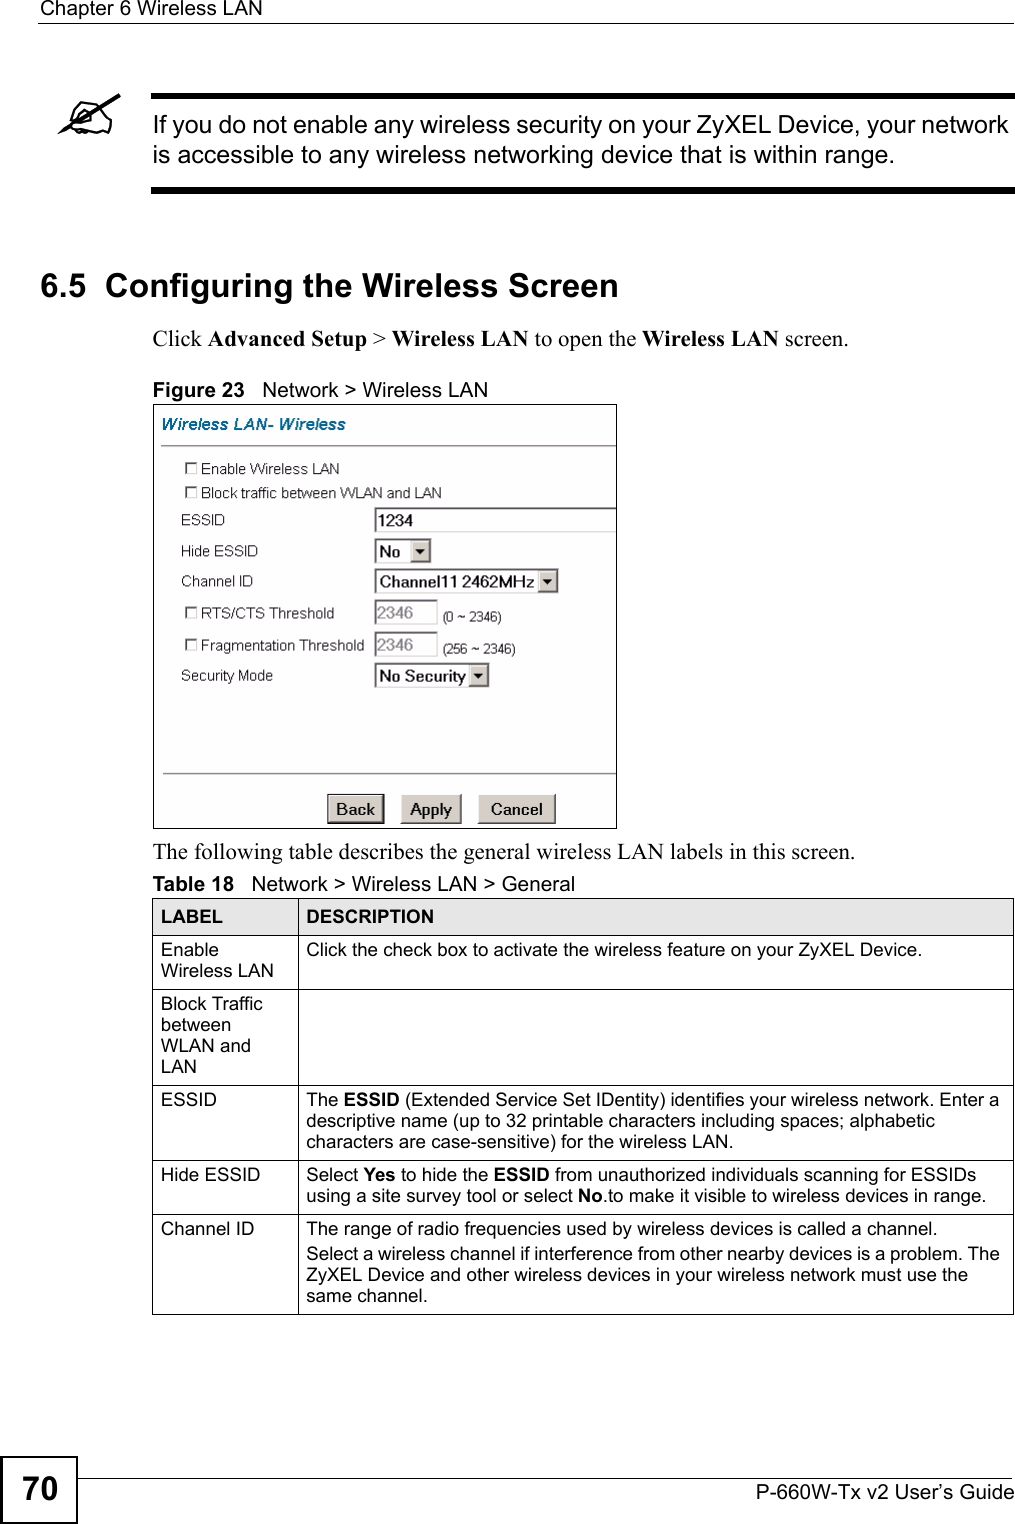 Chapter 6 Wireless LANP-660W-Tx v2 User’s Guide70&quot;If you do not enable any wireless security on your ZyXEL Device, your network is accessible to any wireless networking device that is within range. 6.5  Configuring the Wireless Screen Click Advanced Setup &gt; Wireless LAN to open the Wireless LAN screen.Figure 23   Network &gt; Wireless LAN The following table describes the general wireless LAN labels in this screen.Table 18   Network &gt; Wireless LAN &gt; GeneralLABEL DESCRIPTIONEnable Wireless LANClick the check box to activate the wireless feature on your ZyXEL Device.Block Traffic between WLAN and LANESSID The ESSID (Extended Service Set IDentity) identifies your wireless network. Enter a descriptive name (up to 32 printable characters including spaces; alphabetic characters are case-sensitive) for the wireless LAN. Hide ESSID Select Yes to hide the ESSID from unauthorized individuals scanning for ESSIDs using a site survey tool or select No.to make it visible to wireless devices in range.Channel ID The range of radio frequencies used by wireless devices is called a channel.Select a wireless channel if interference from other nearby devices is a problem. The ZyXEL Device and other wireless devices in your wireless network must use the same channel.